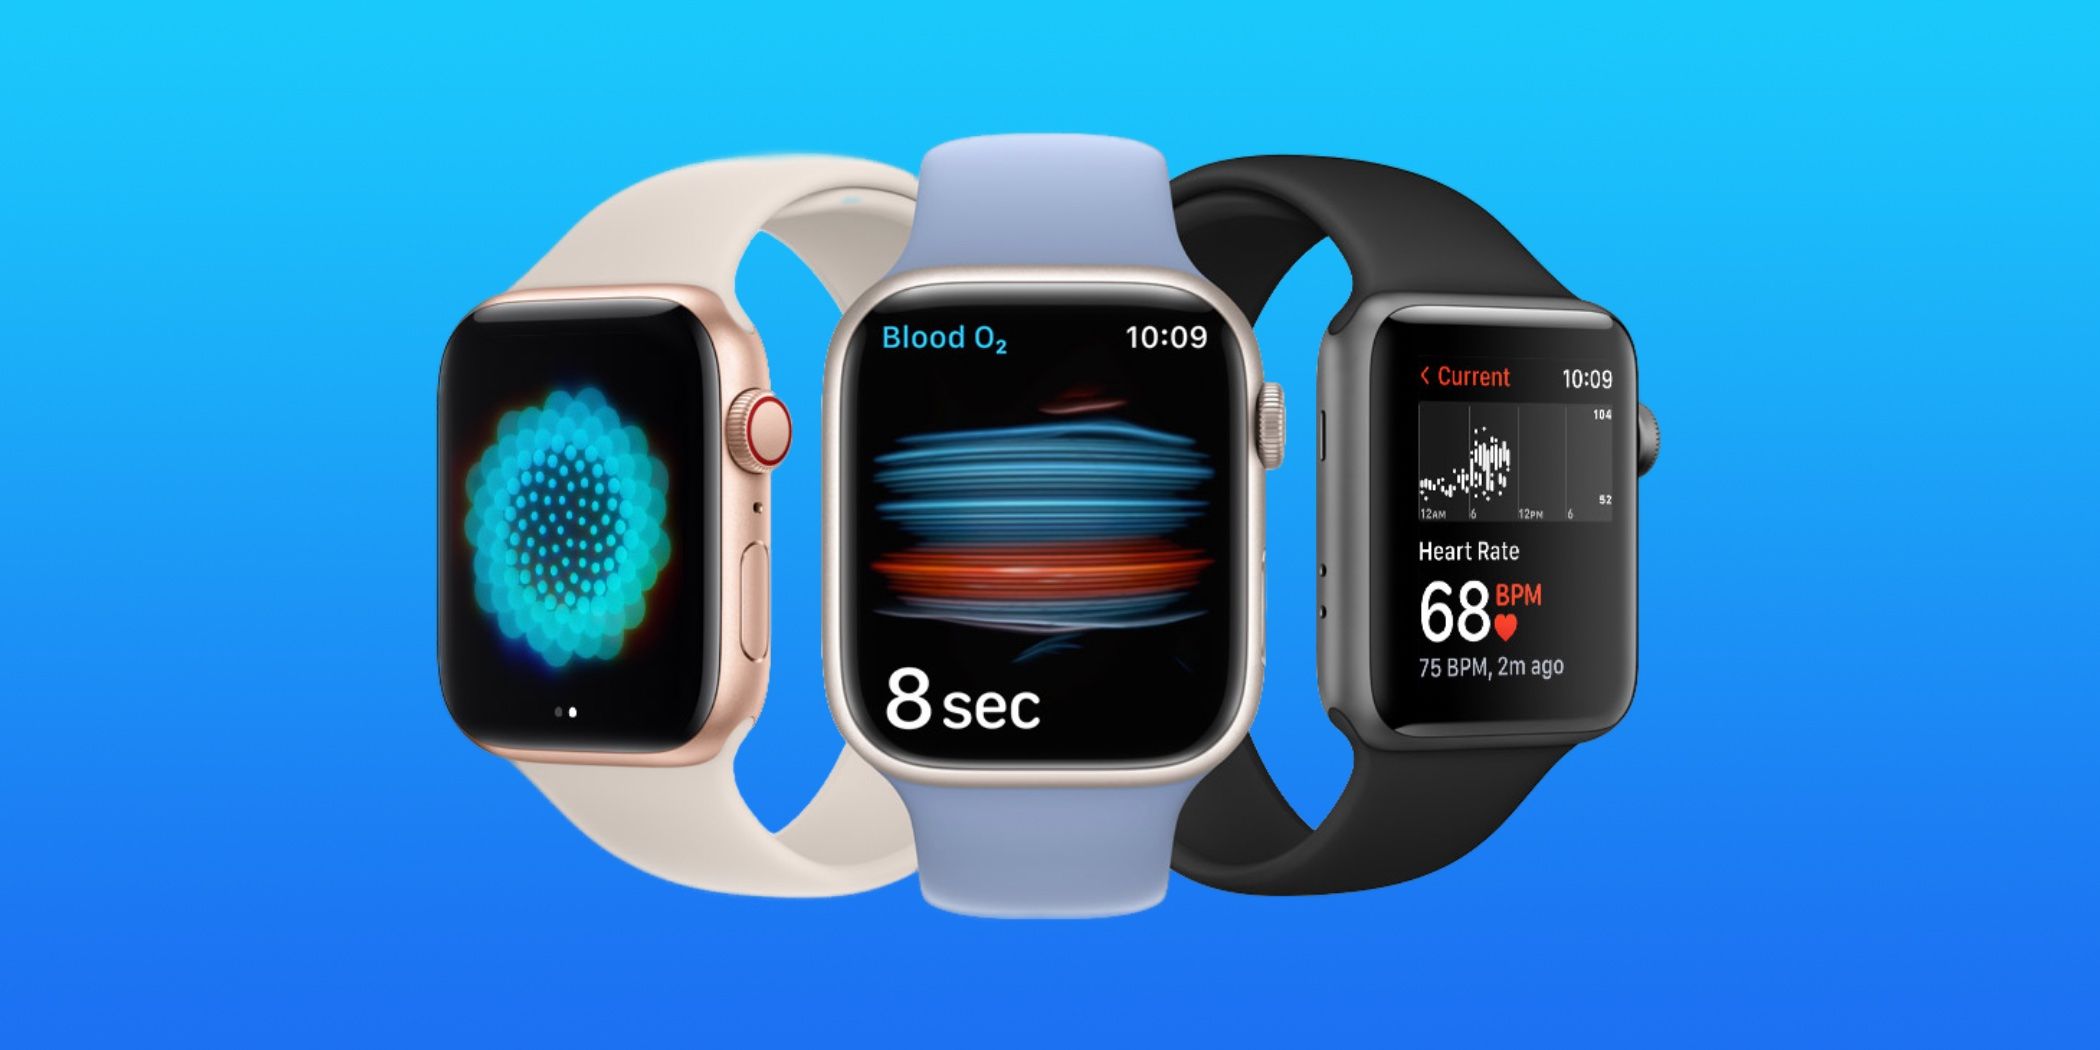 The health apps on Apple Watch.